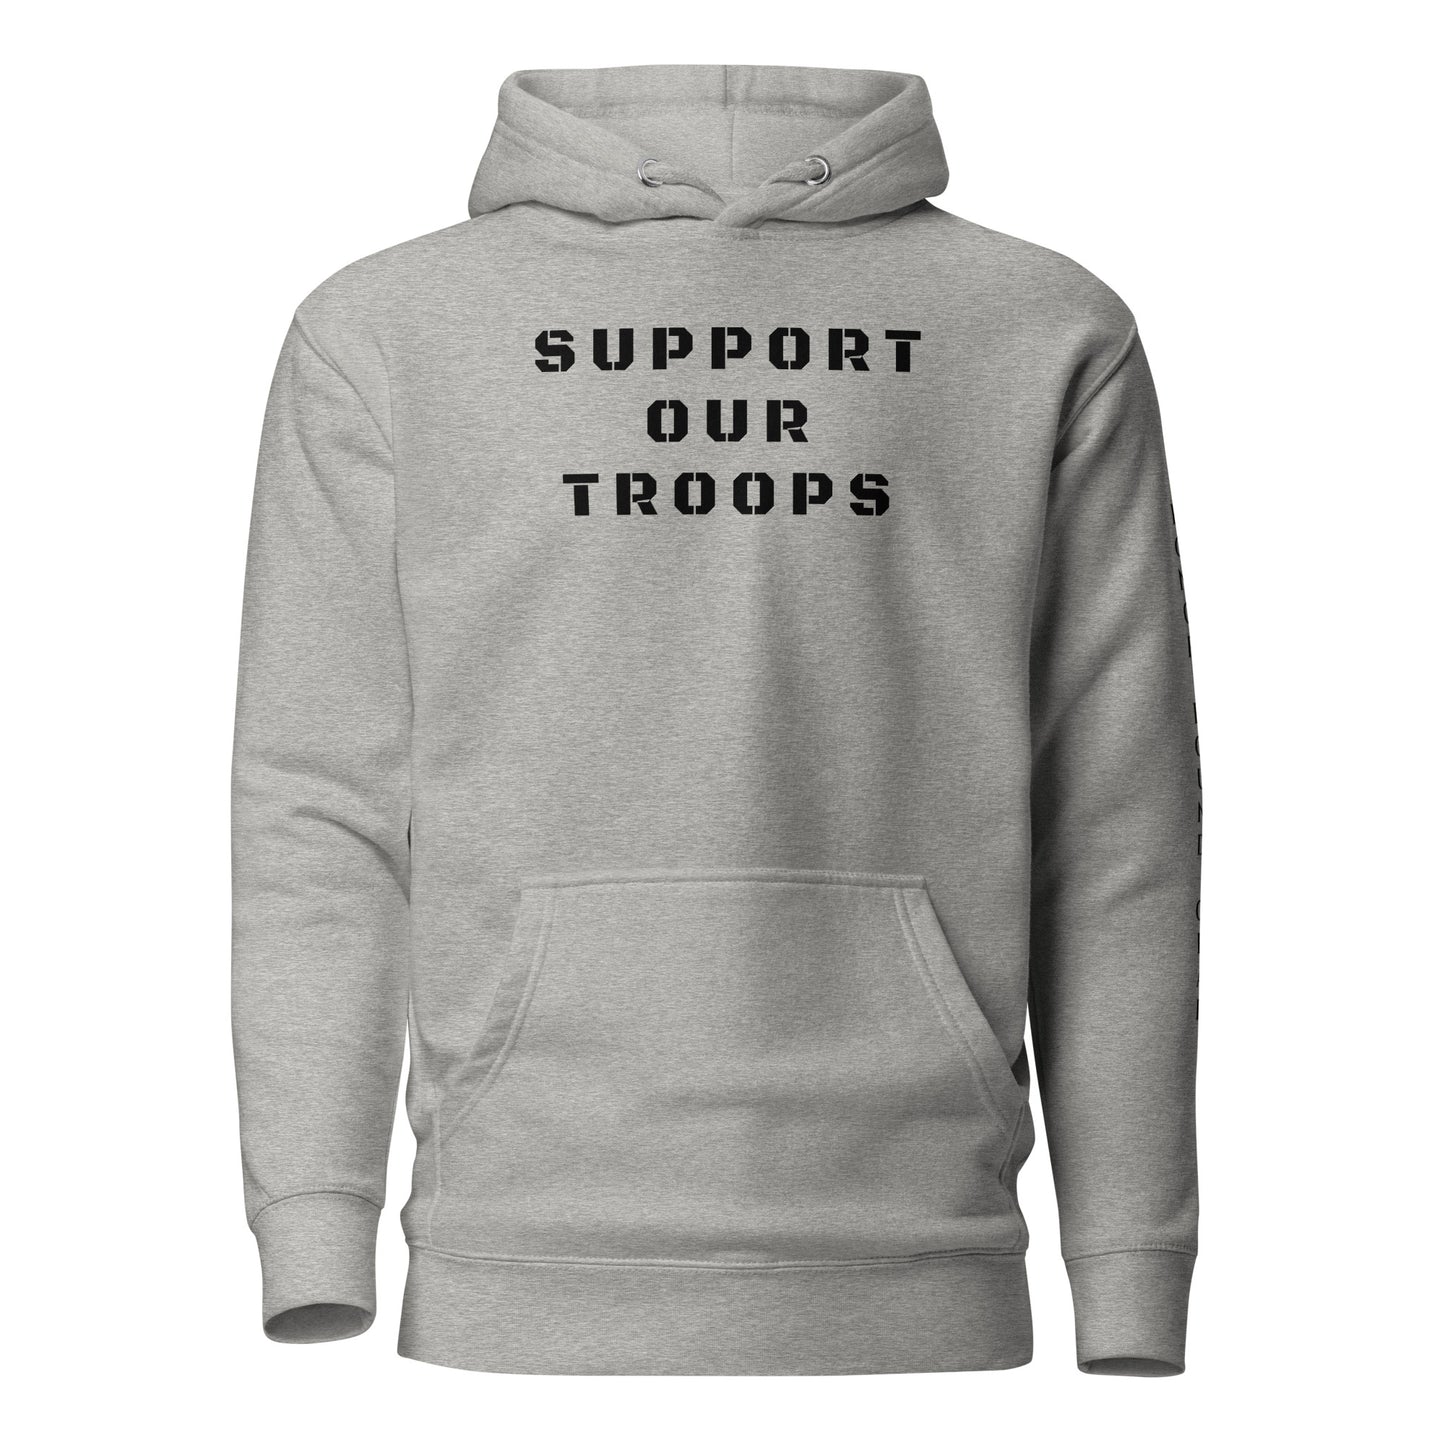 HBG "Support Our Troops" Unisex Hoodie